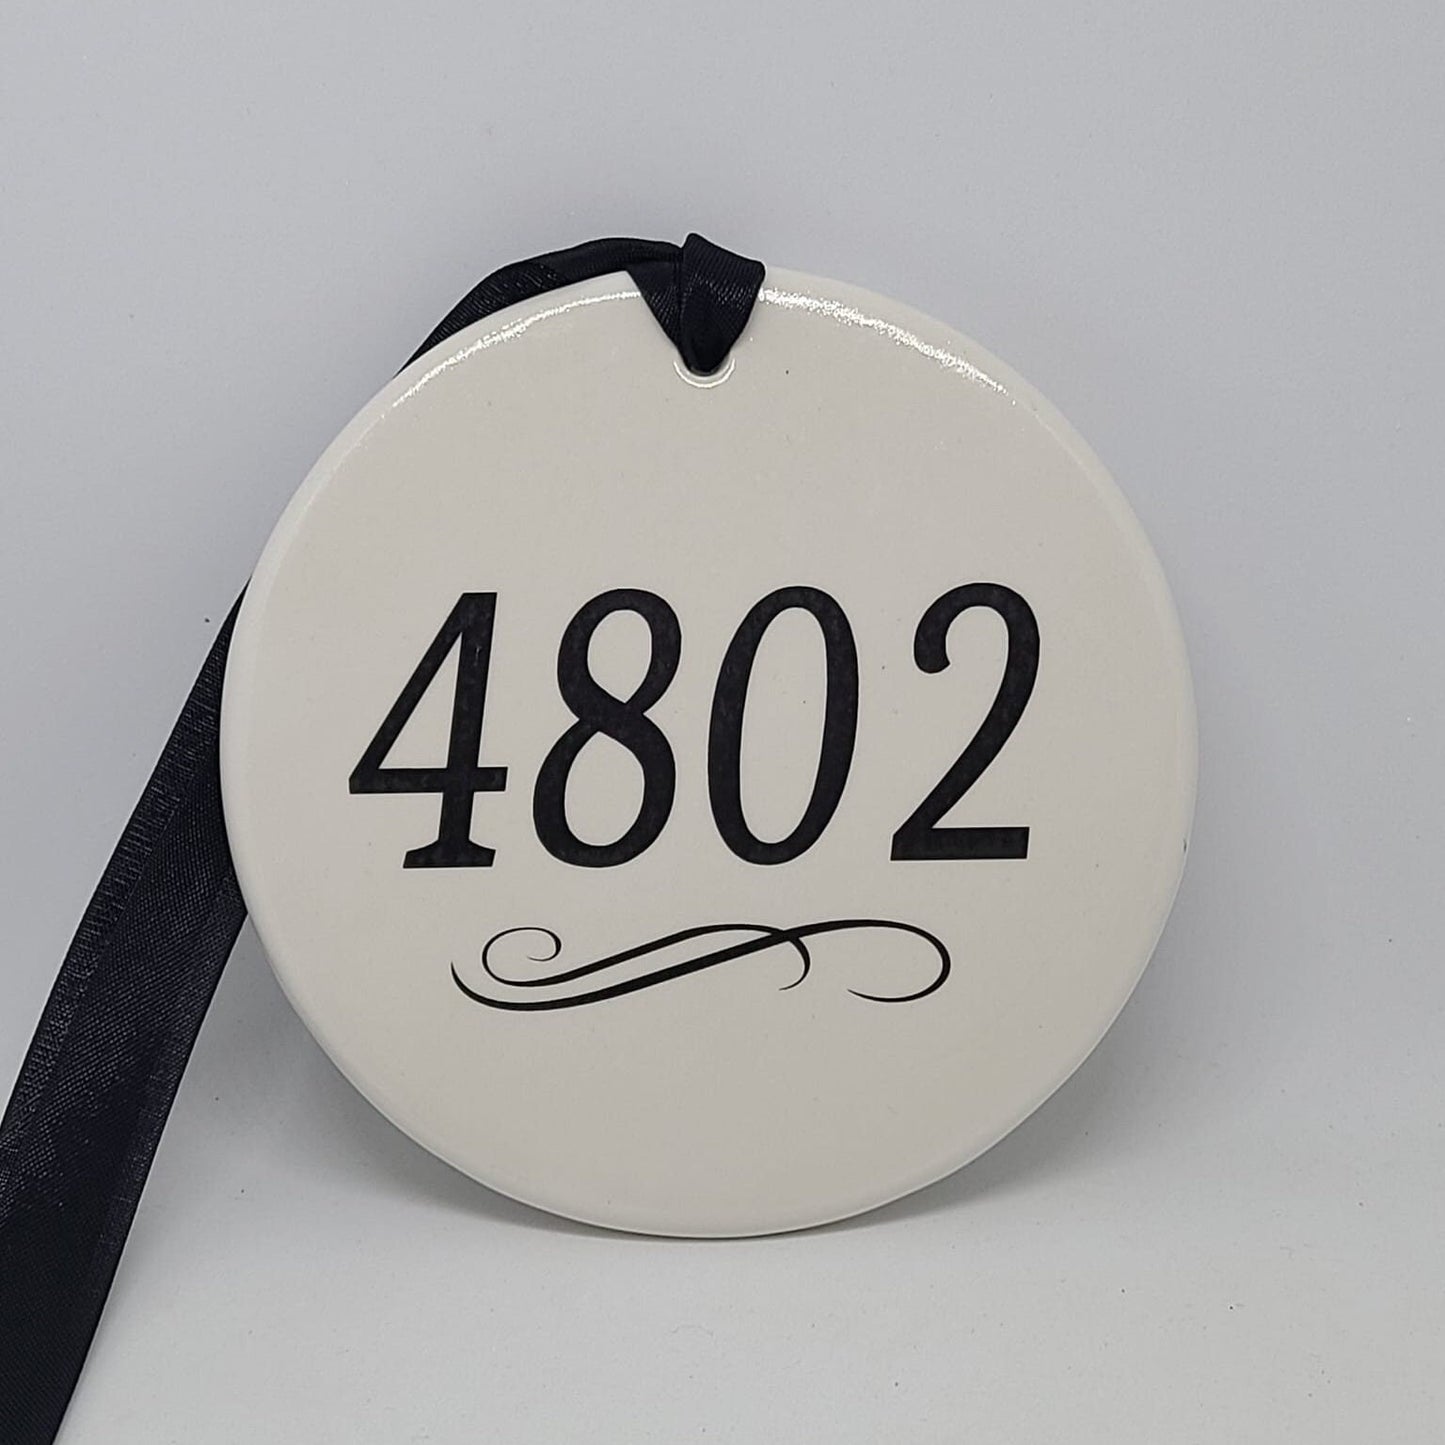 Sign House Numbers, Address Sign, Ceramic House Number Sign - your address - different sizes available